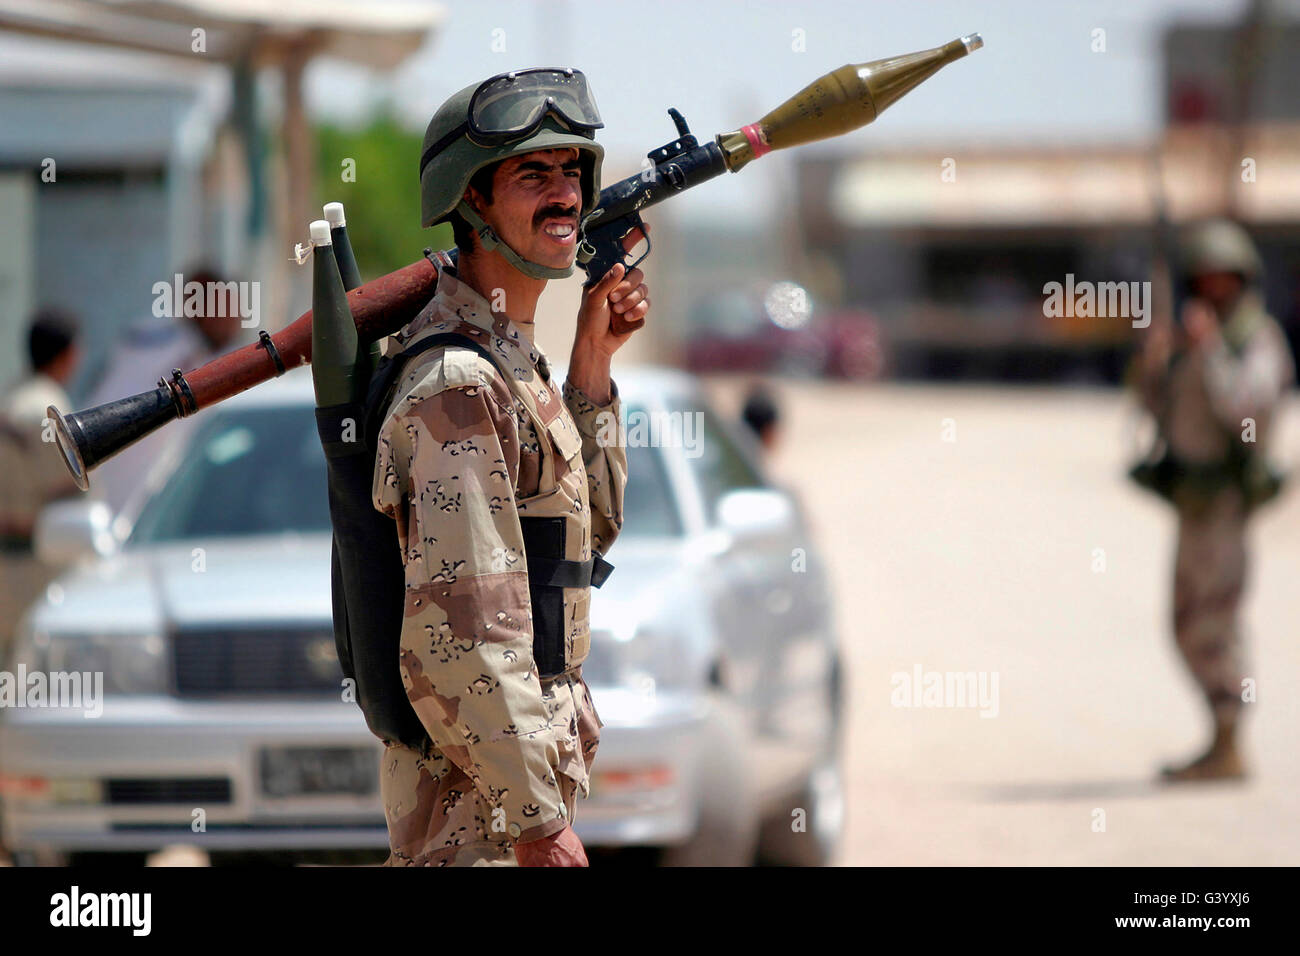 A member of the Iraqi Security Force Commandos armed with a rocket propelled grenade launcher. Stock Photo